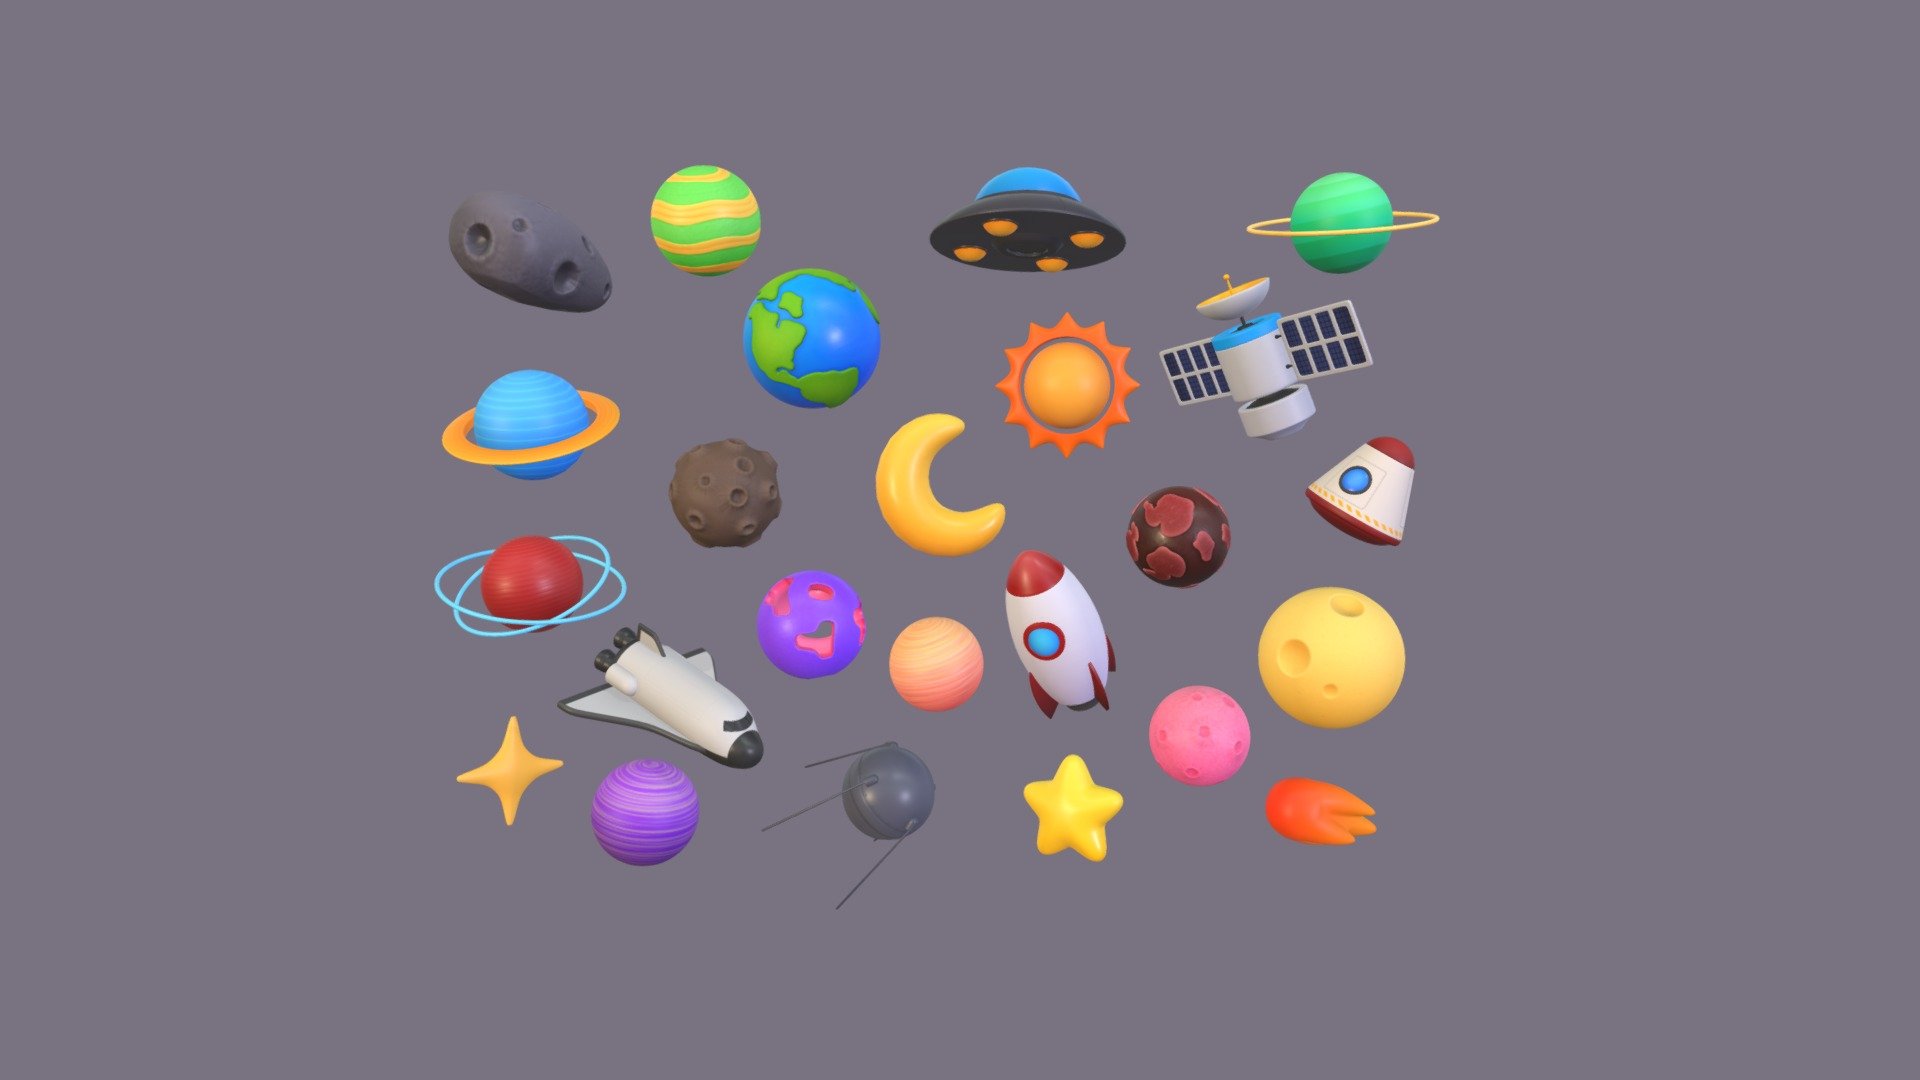 Cartoon Space Object 3d models Pack. 
  


29,419 poly 

30,402 Vert 
  


File Formats 


3ds Max  

FBX 
 


Non-overlapped UV 

Clean Topology 

No Rig 
 


2048 PNG textures 


Base Color 

Nomal Map 

Roughness 
  


Collection Include  

- Star 

- Earth 

- FullMoon 

- Meteor 

- Sparkle 

- UFO 

- Crescent 

- Planet_A 

- Planet_B 

- Planet_C 

- Planet_D 

- Planet_E 

- Planet_F 

- Planet_G 

- Planet_H 

- Planet_I 

- Rocket 

- Satellite 

- Asteroid 

- SpaceCapsule 

- SpaceShuttle 

- Sputnik 

- Sun 

- Comet 
 - Cartoon Space Pack - Buy Royalty Free 3D model by Cartoon Objects (@CartoonObjects) 3d model